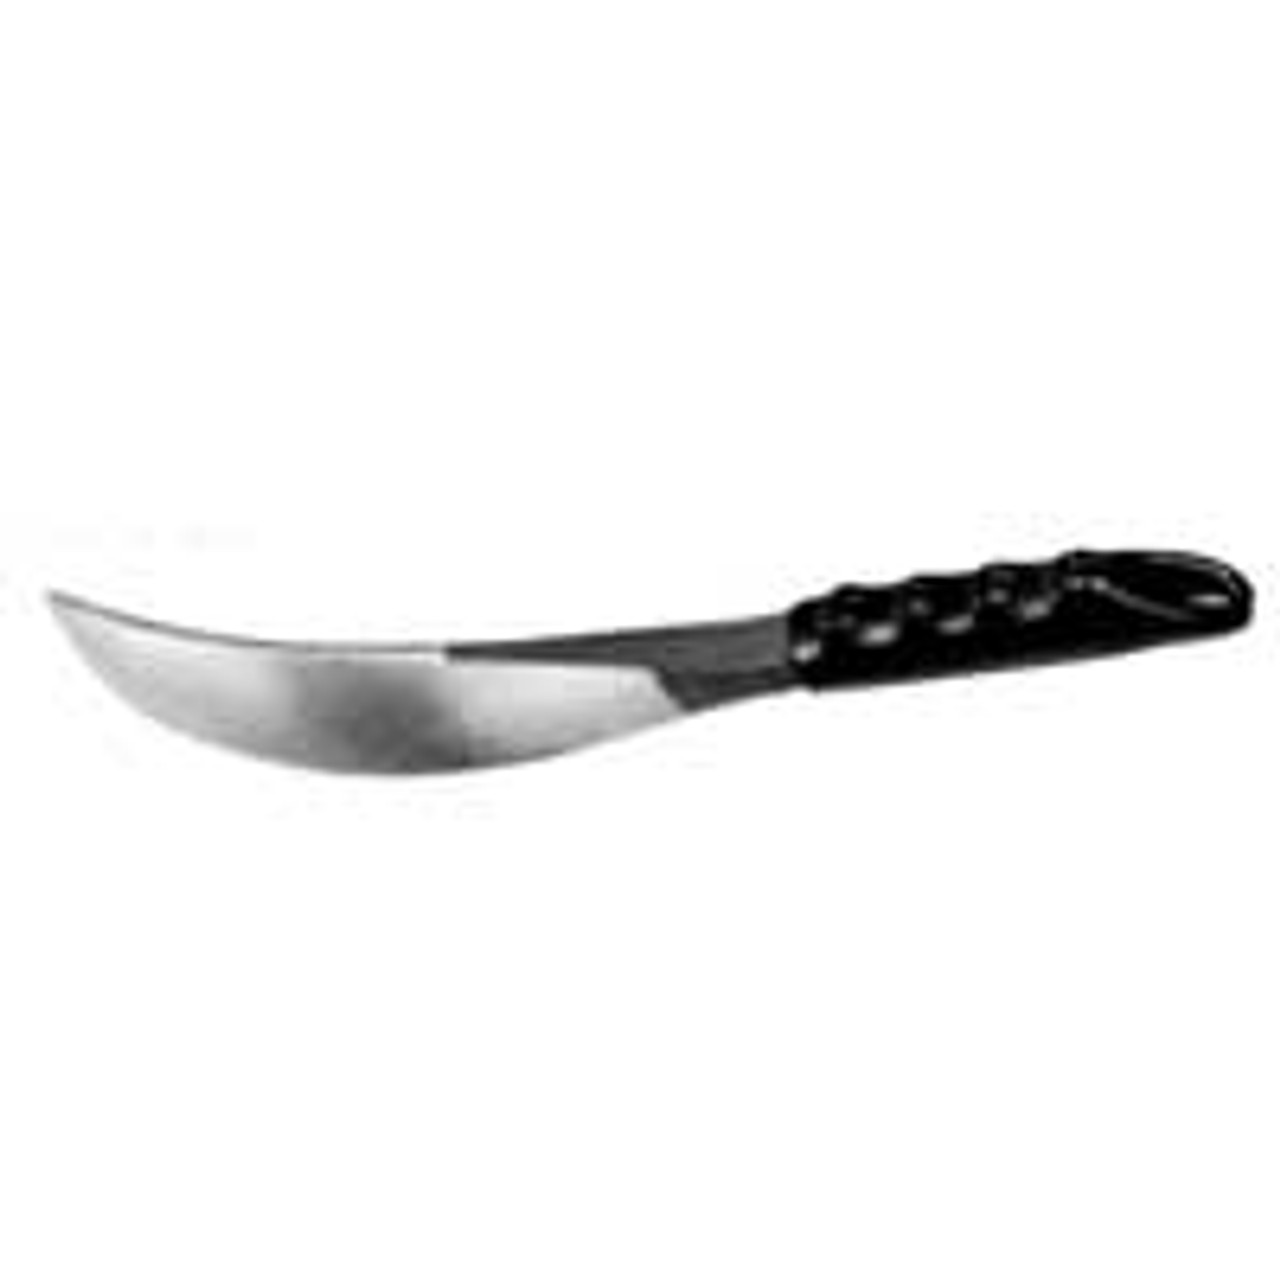 S & G Tools General Spoon 89625